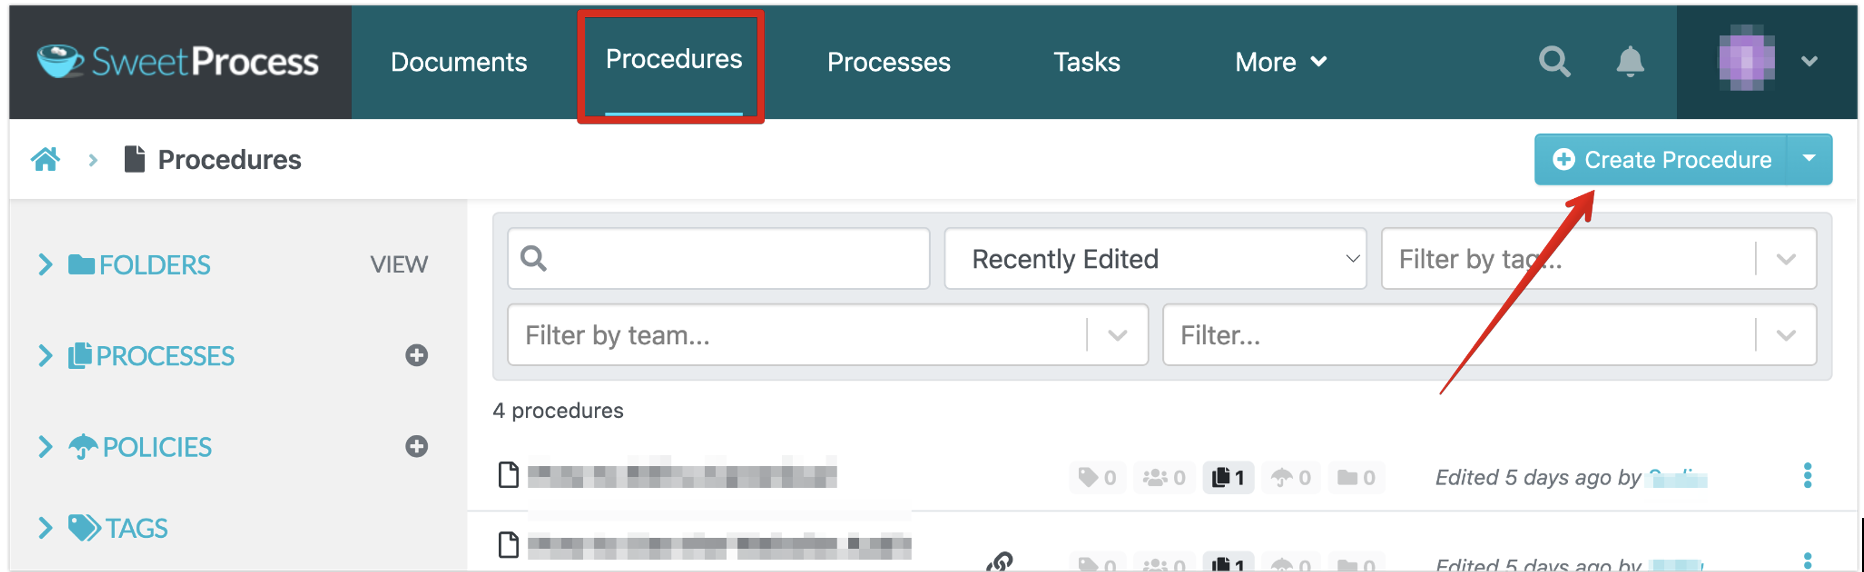 create a process for your team through the “Processes” tab